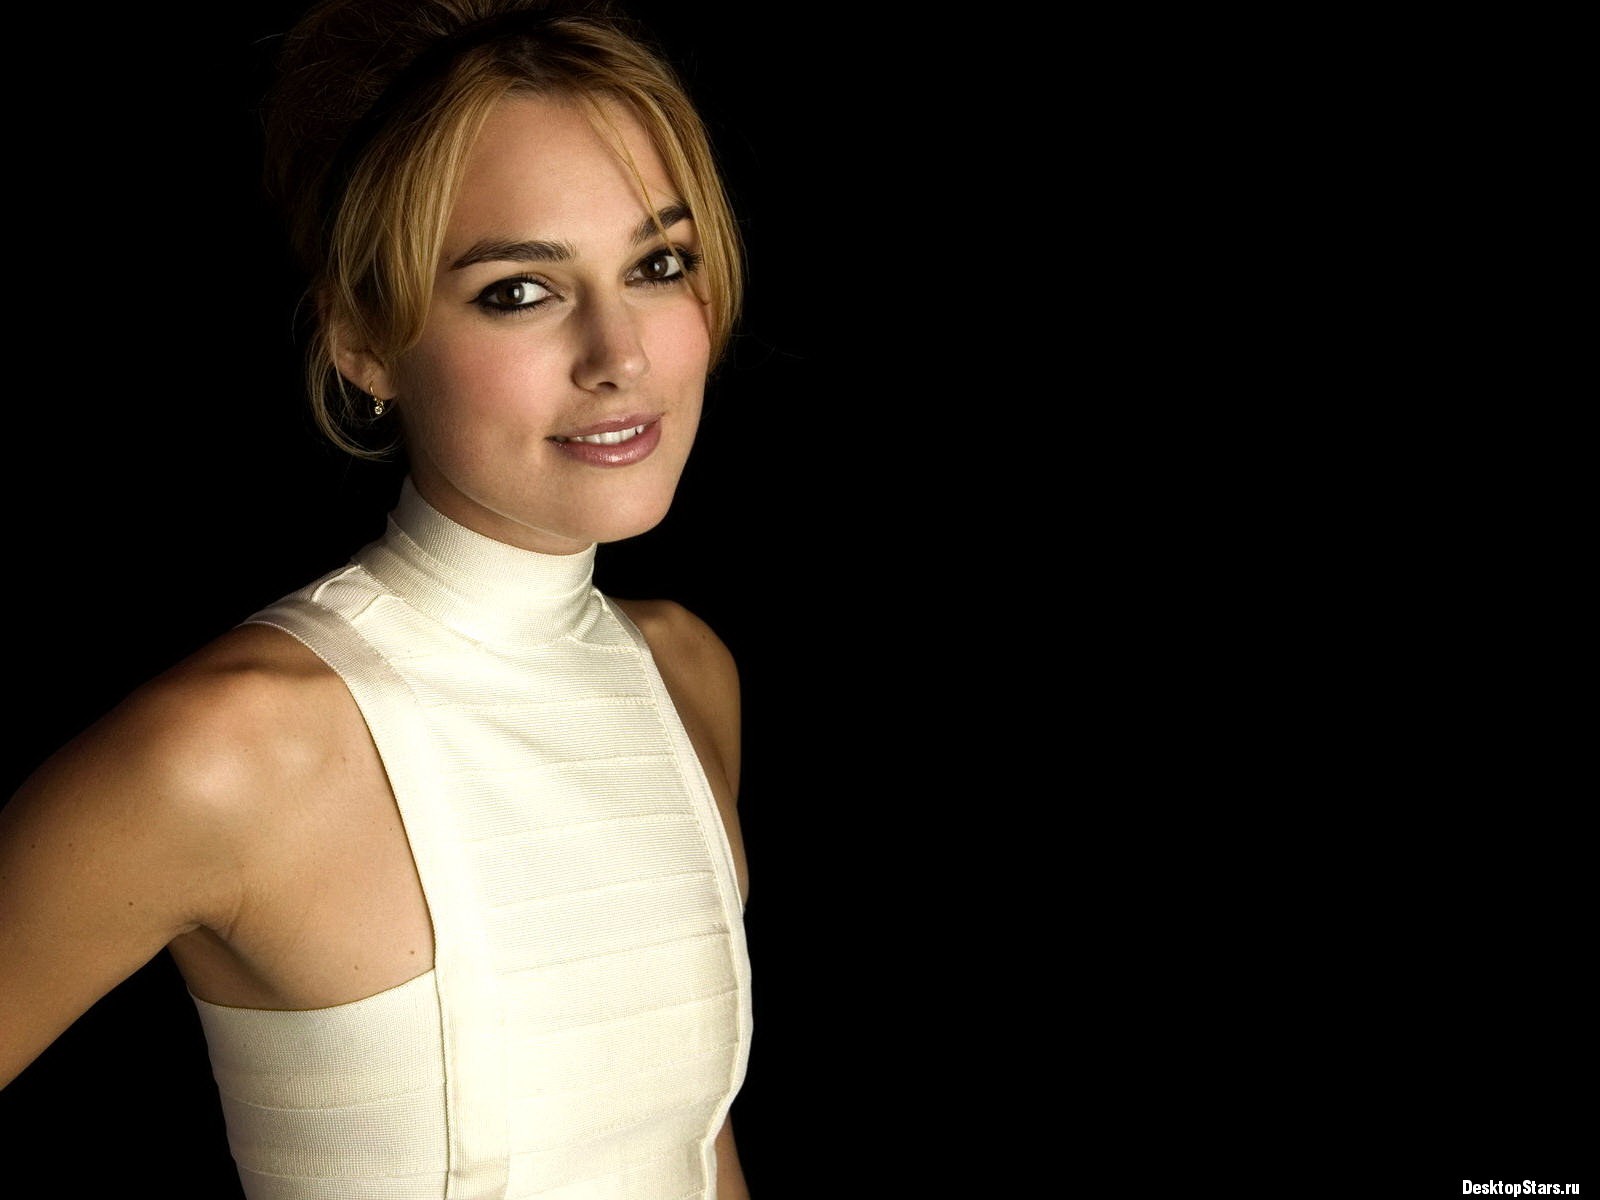 Keira Knightley #066 - 1600x1200 Wallpapers Pictures Photos Images